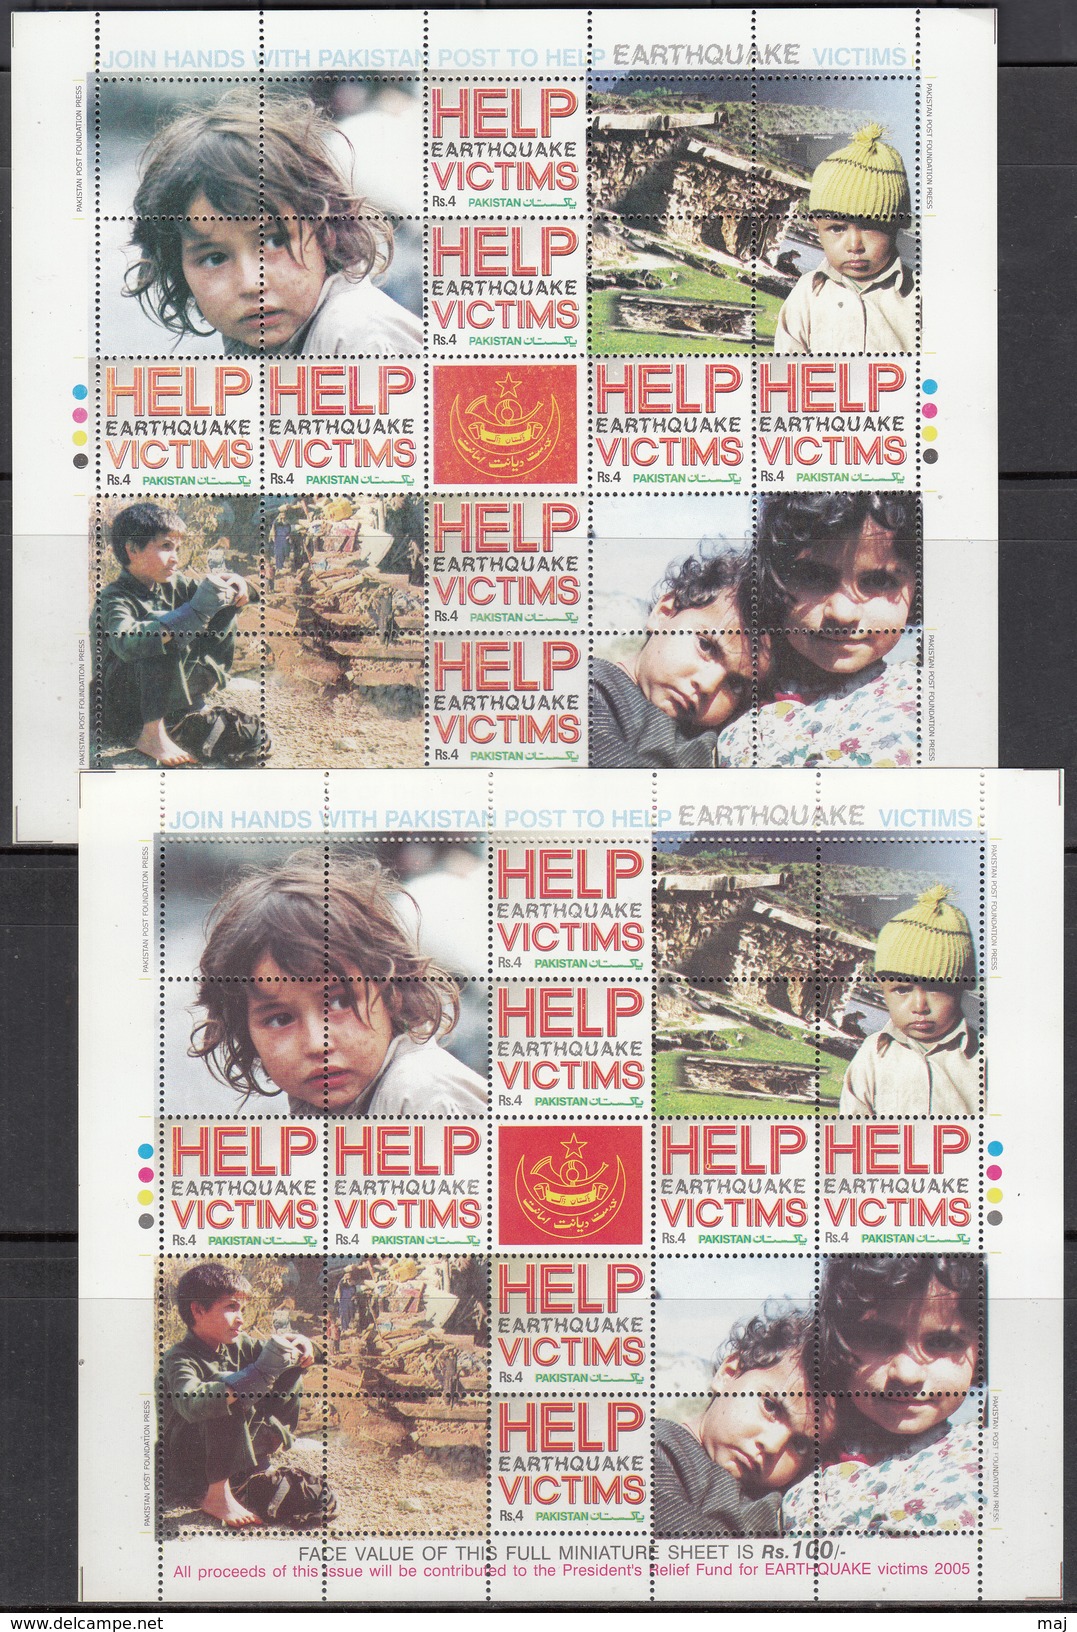 Pakistan Stamps Sheet 2005 Help Earthquake Victims MNH, Lot Of 2 Sheets With Different Color Variations. Very Rare - Pakistan